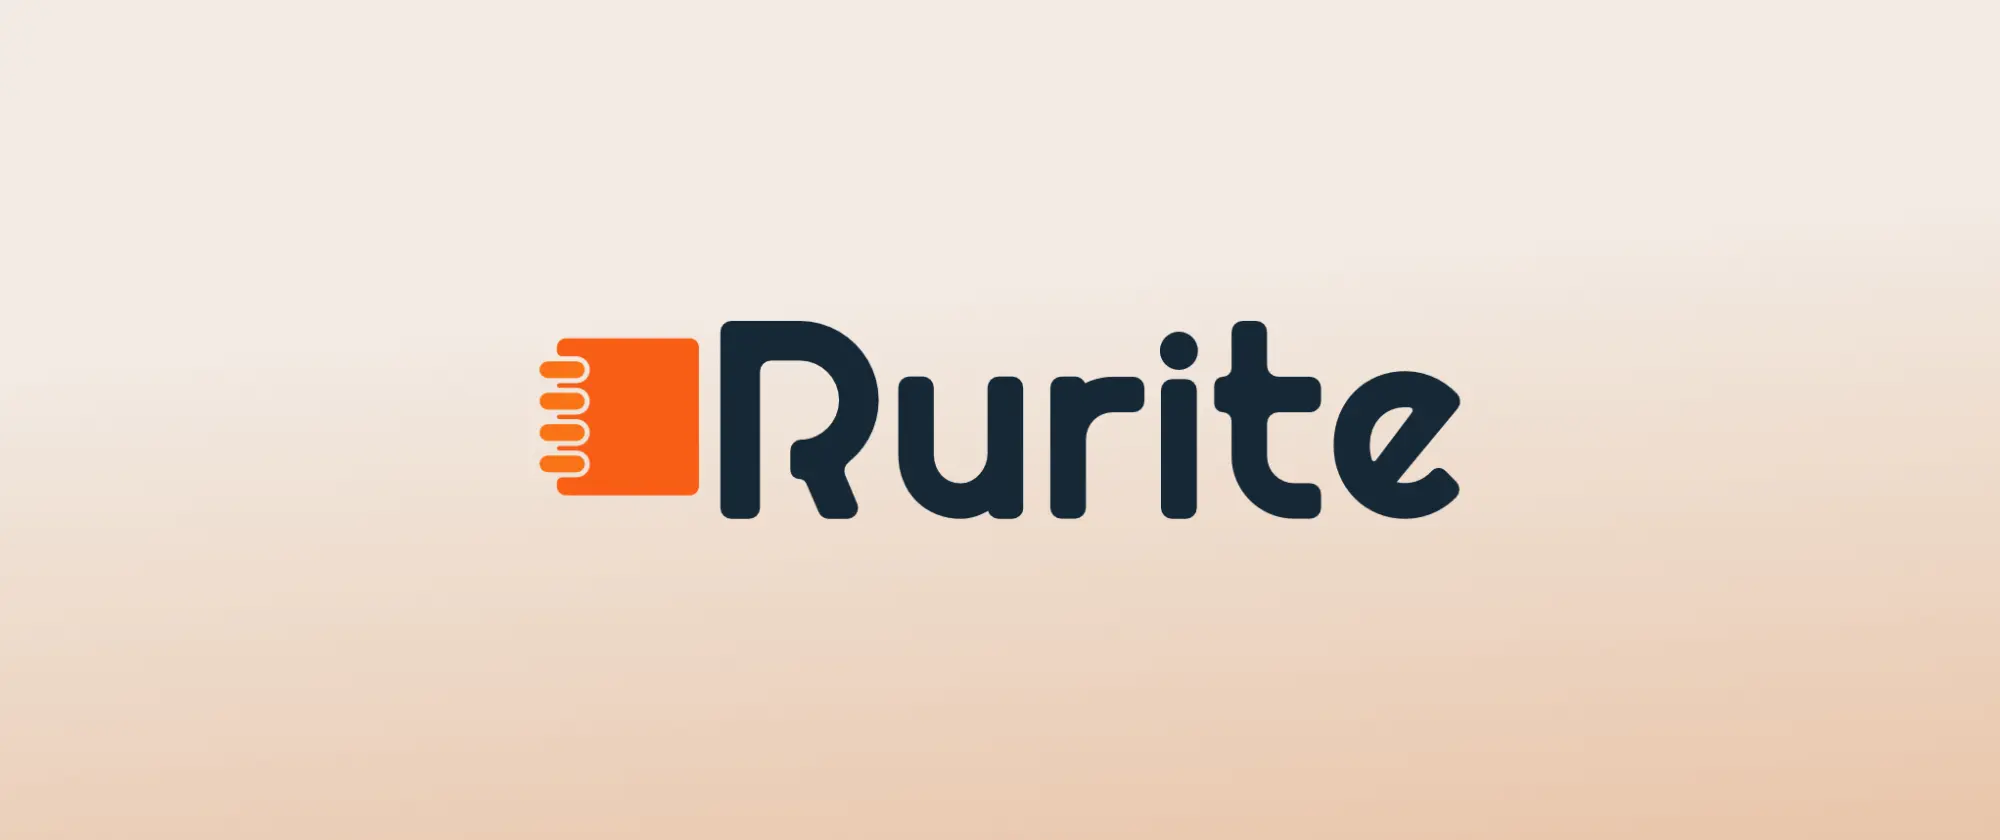 Rurite an open-source note taking application.